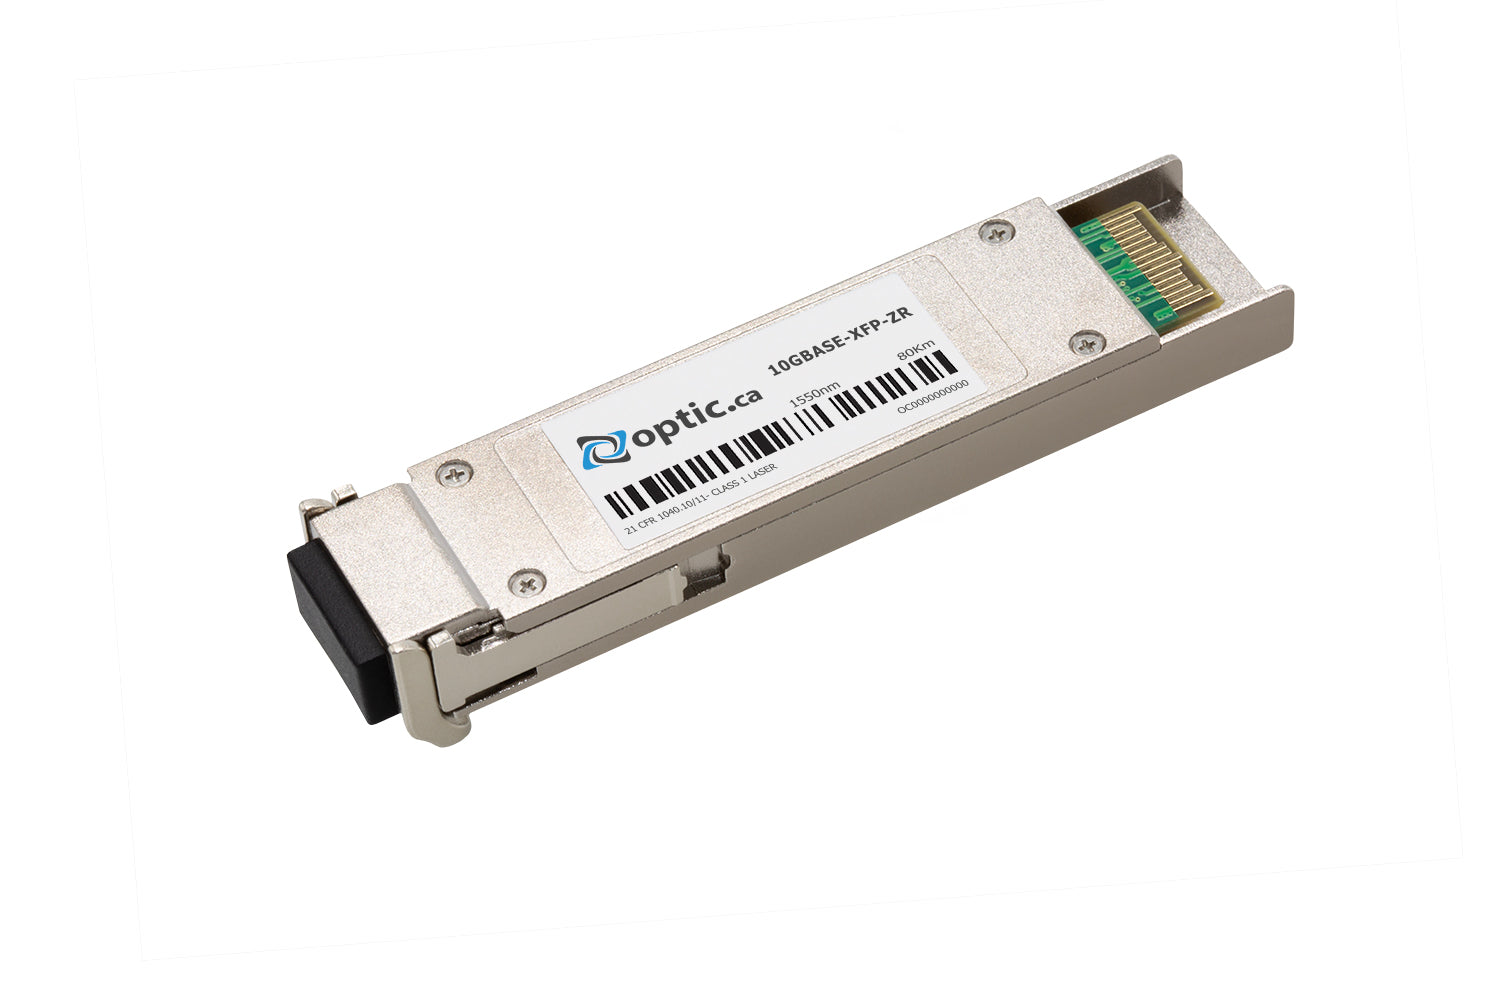 OPTIC.CA - 10GBASE-ZR XFP - AT-XPZR80-OC - ALLIED TELESIS COMPATIBLE